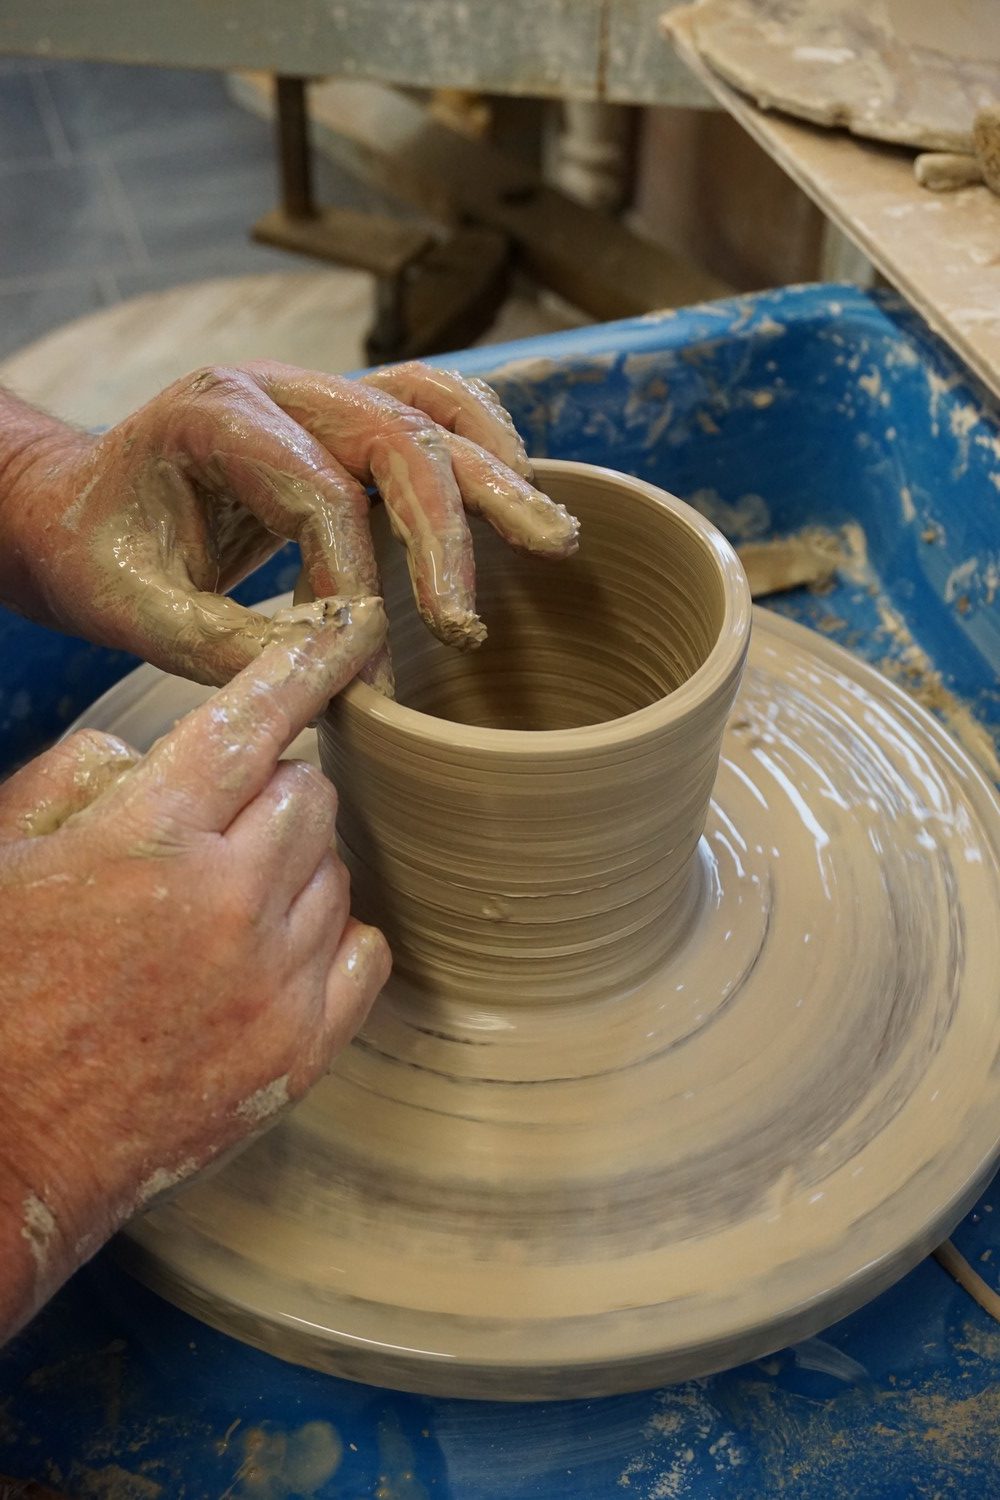 Pottery day opportunity at Camphill Village Trust's community, The Grange